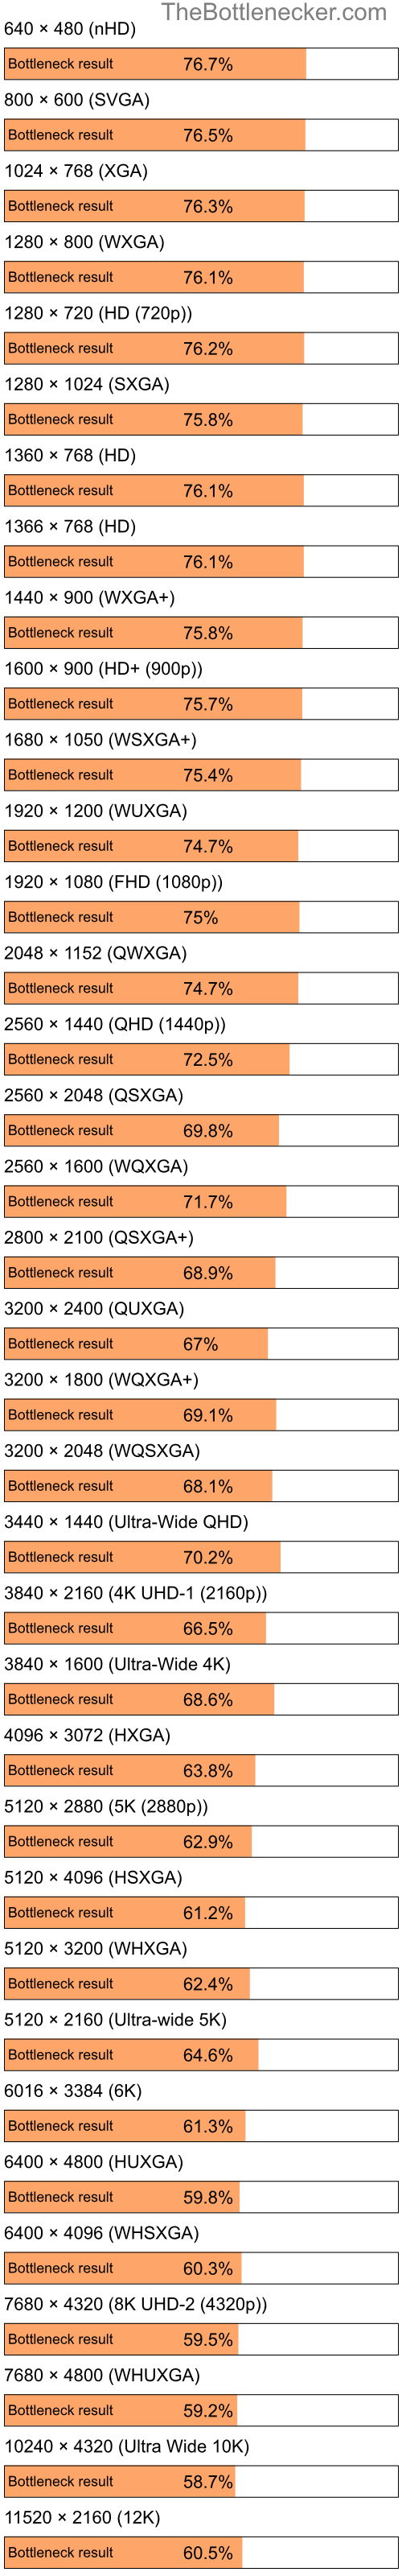 Bottleneck results by resolution for AMD Athlon XP 3000+ and NVIDIA GeForce RTX 3050 in Graphic Card Intense Tasks